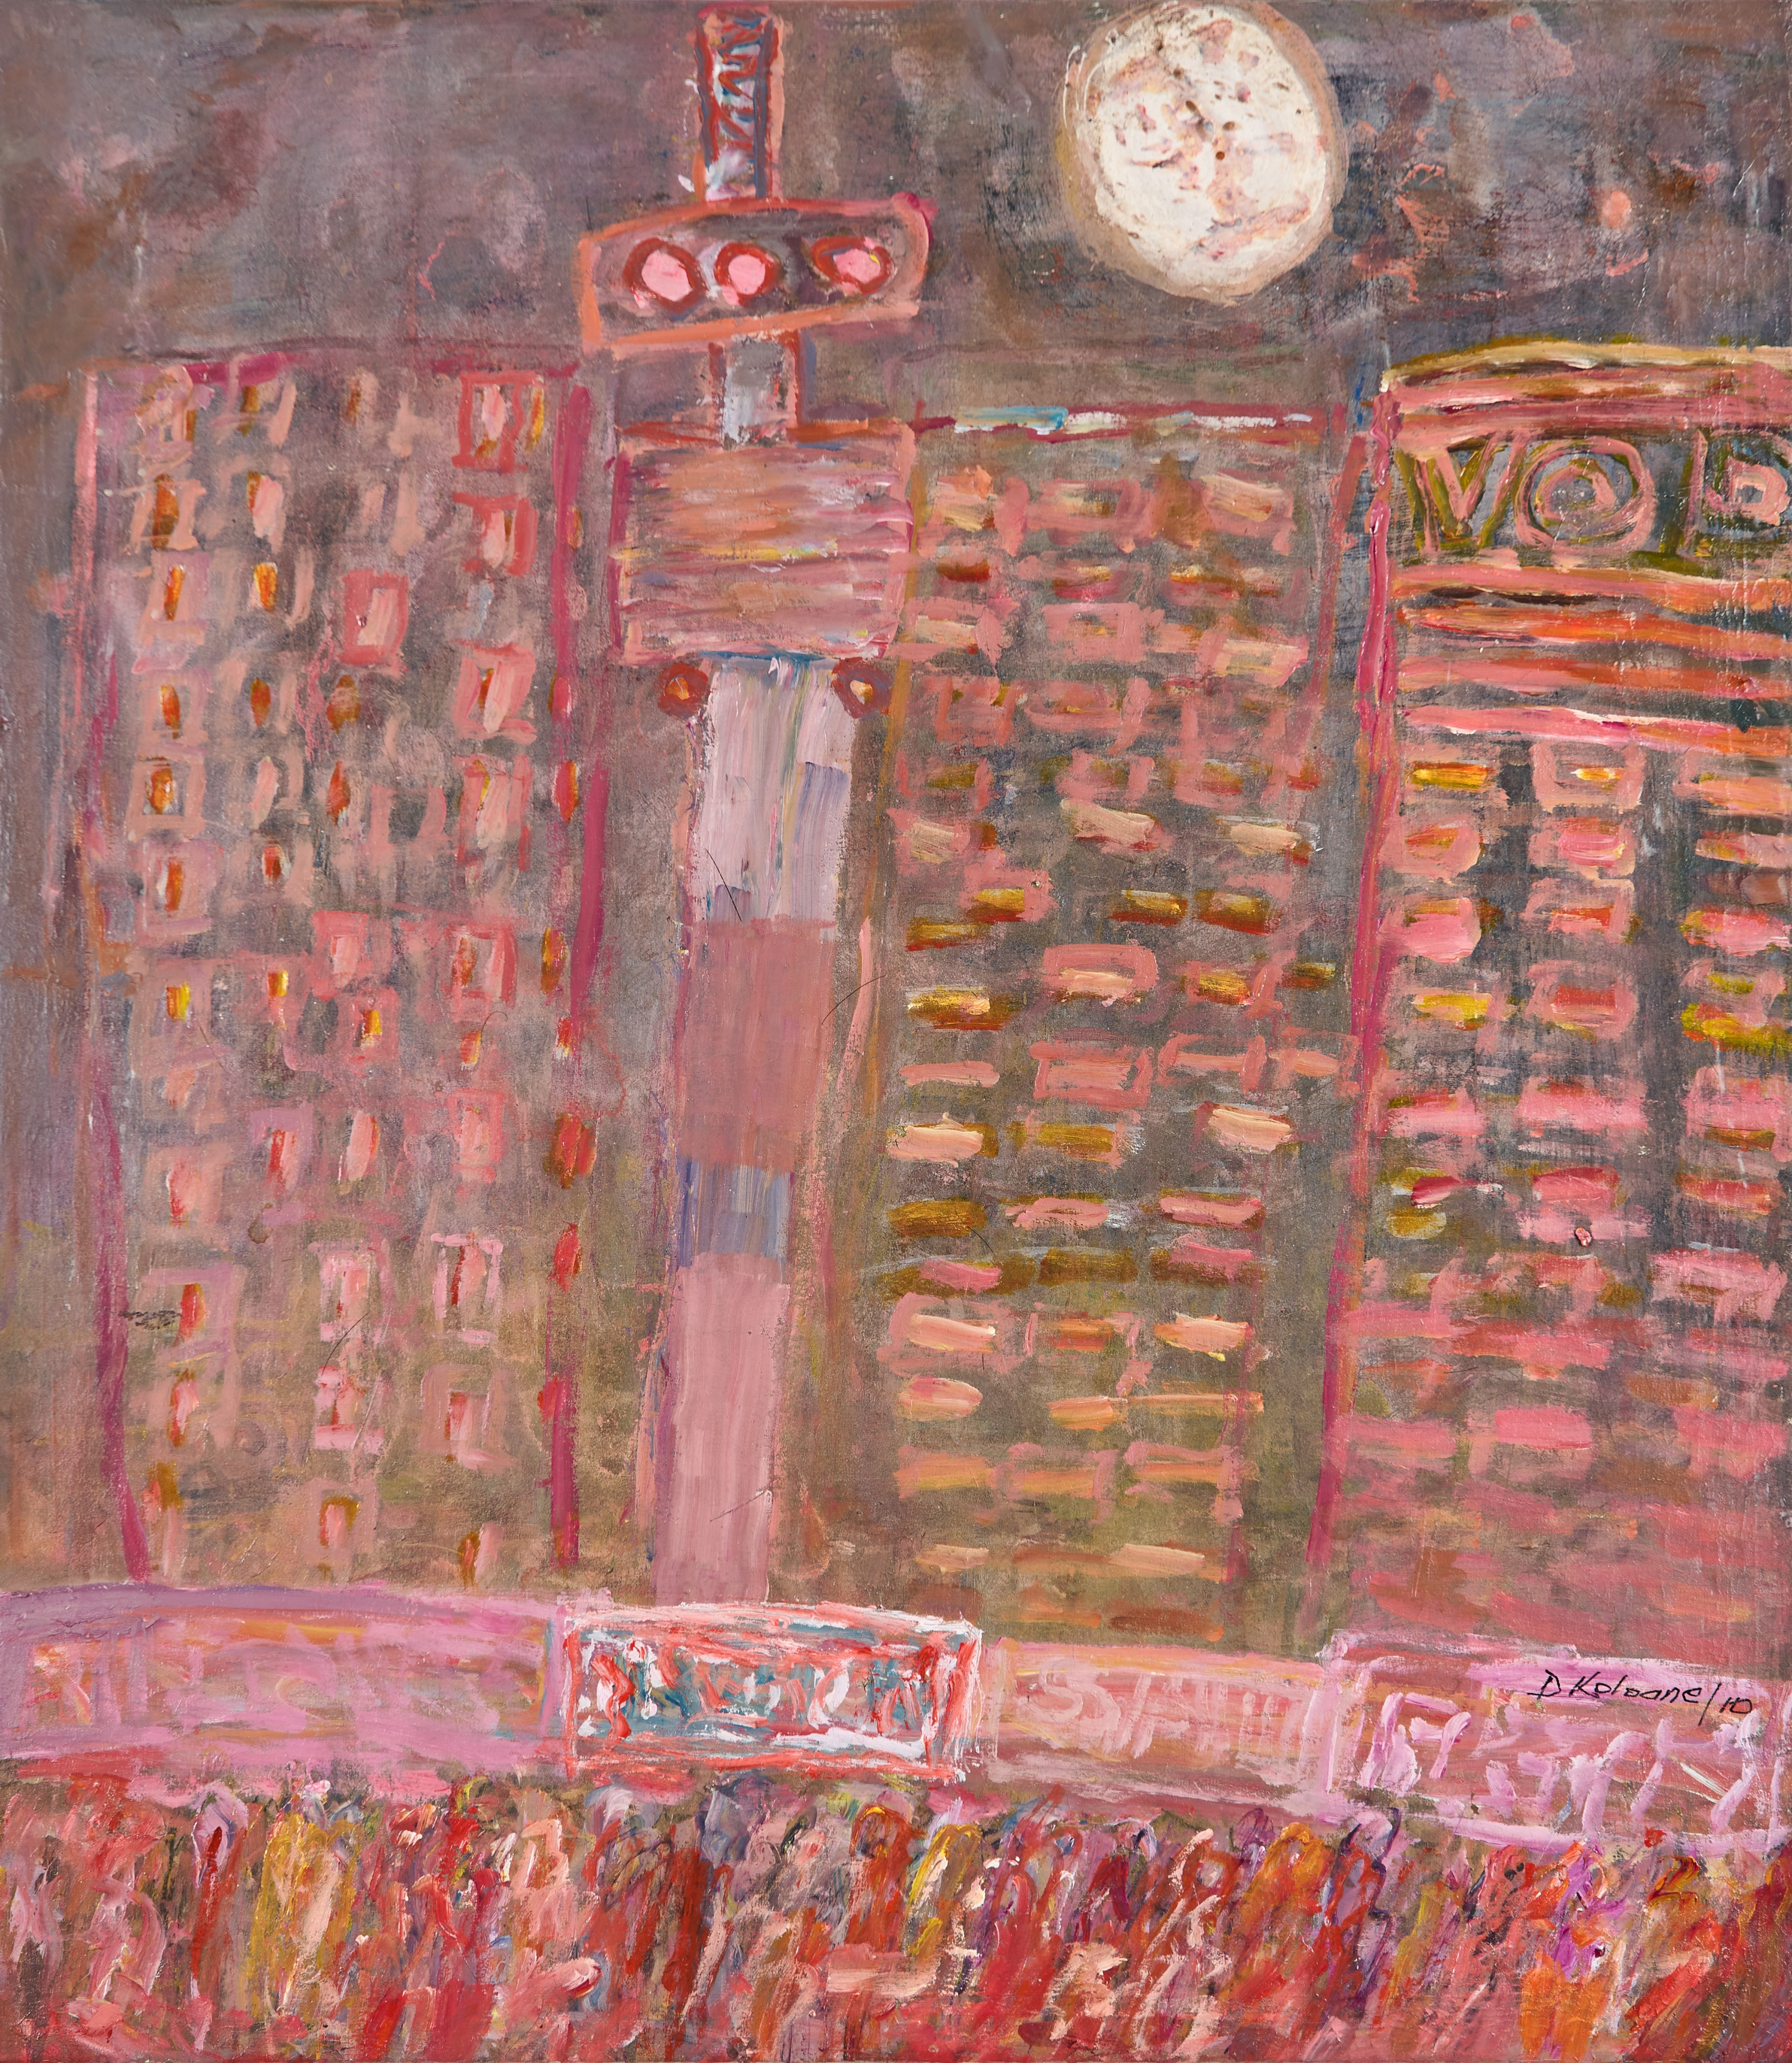 David Koloane

Untitled (the moon over Hillbrow Tower), 1995

Oil &amp;amp; mixed media on canvas&amp;nbsp;

124 x 110 cm

Enquire